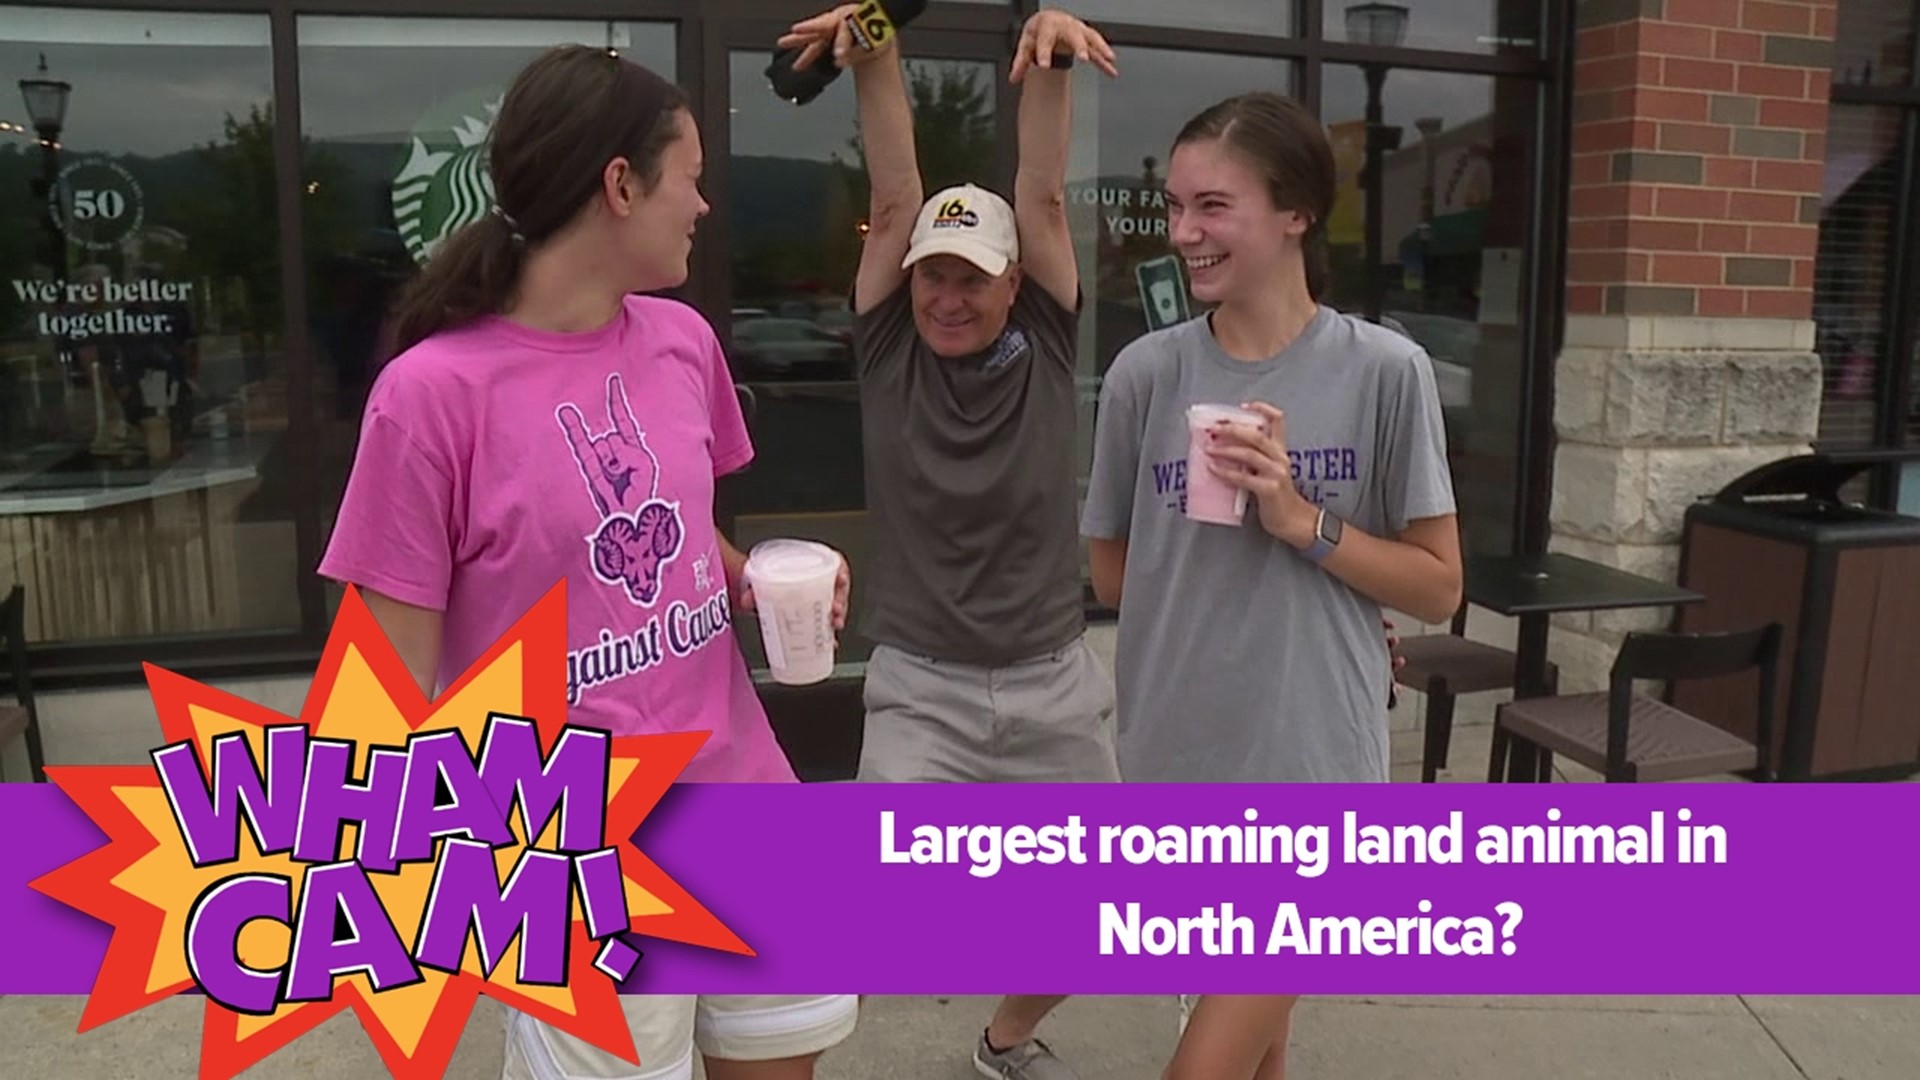 Ever wonder what the largest land animal is in North America that's not in a zoo? Joe was in Moosic to see if anyone there had the answer to this week's Wham Cam.